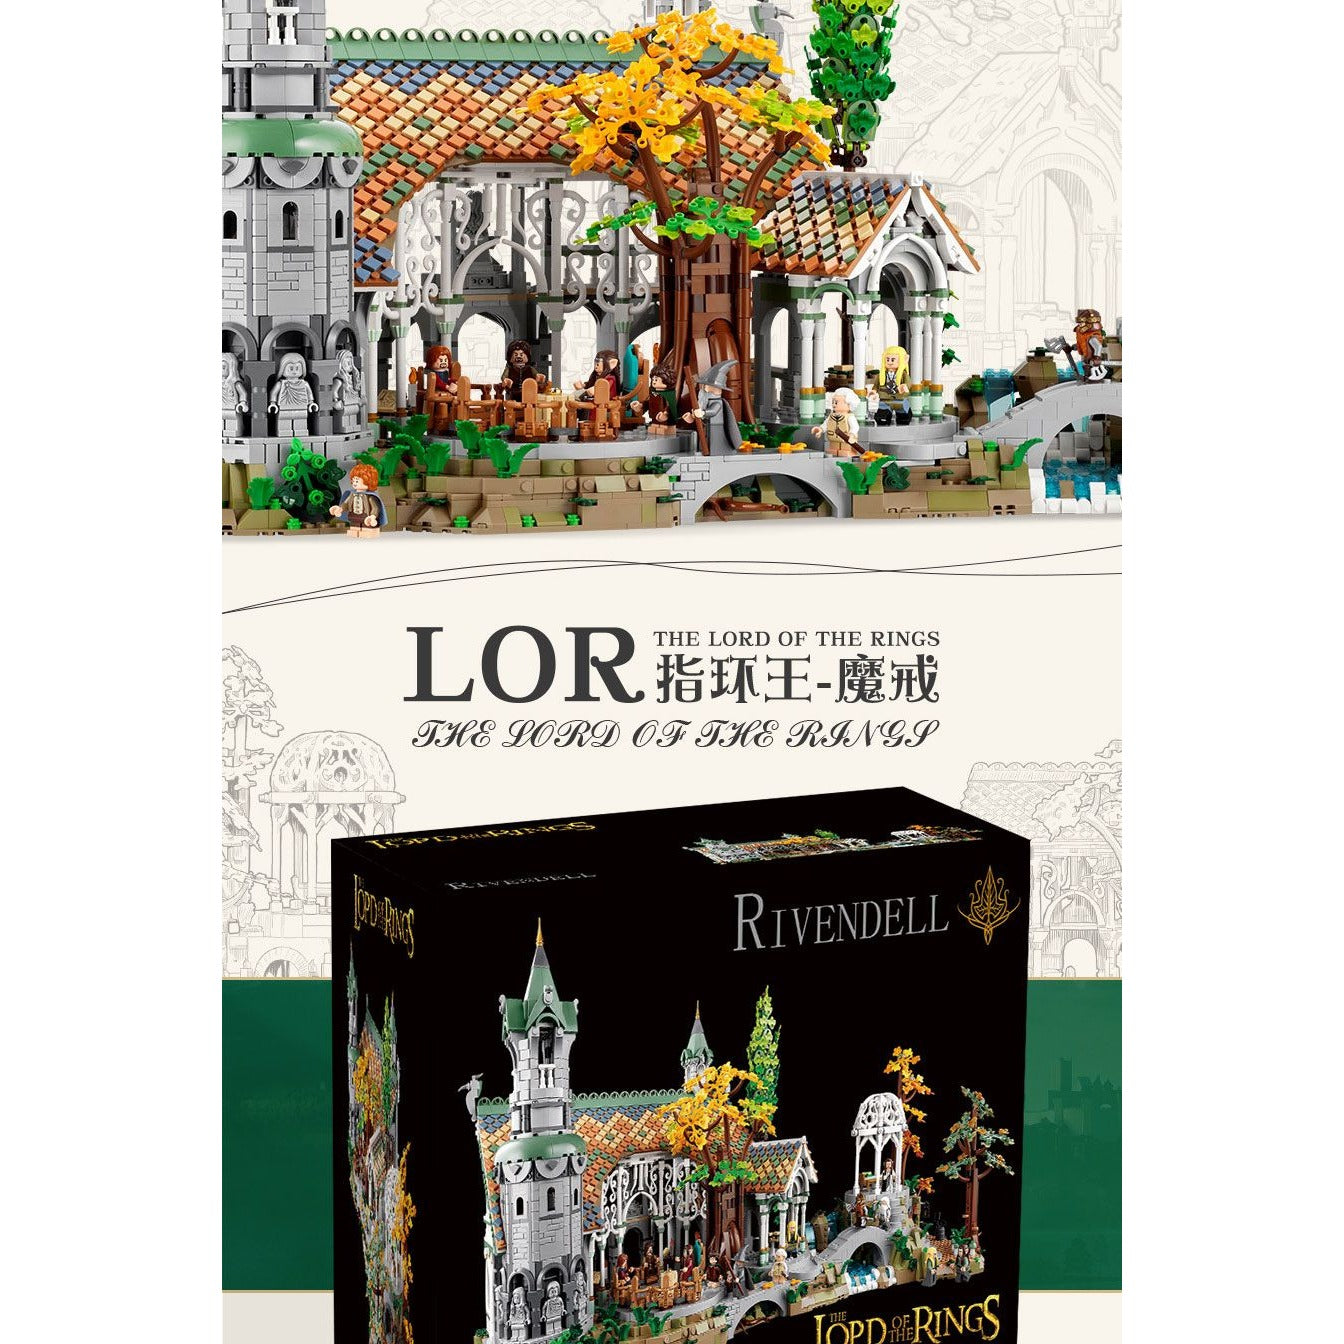 Rivendell - Lord of the Rings, Not Lego but Compatible, w Mini Figures, 6167 pcs